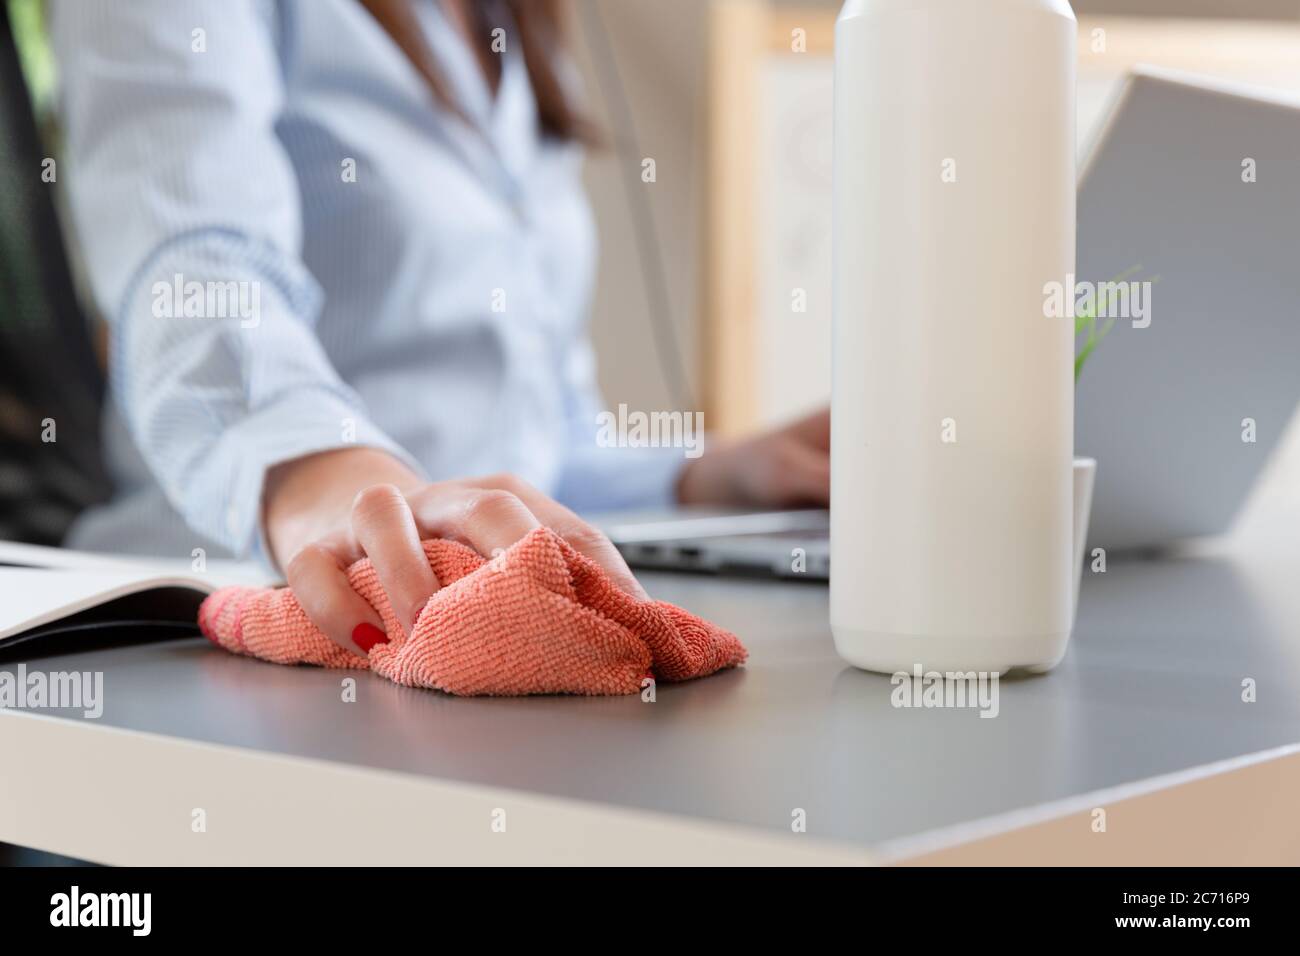 Women disinfecting workplace. New normal concept. Stock Photo